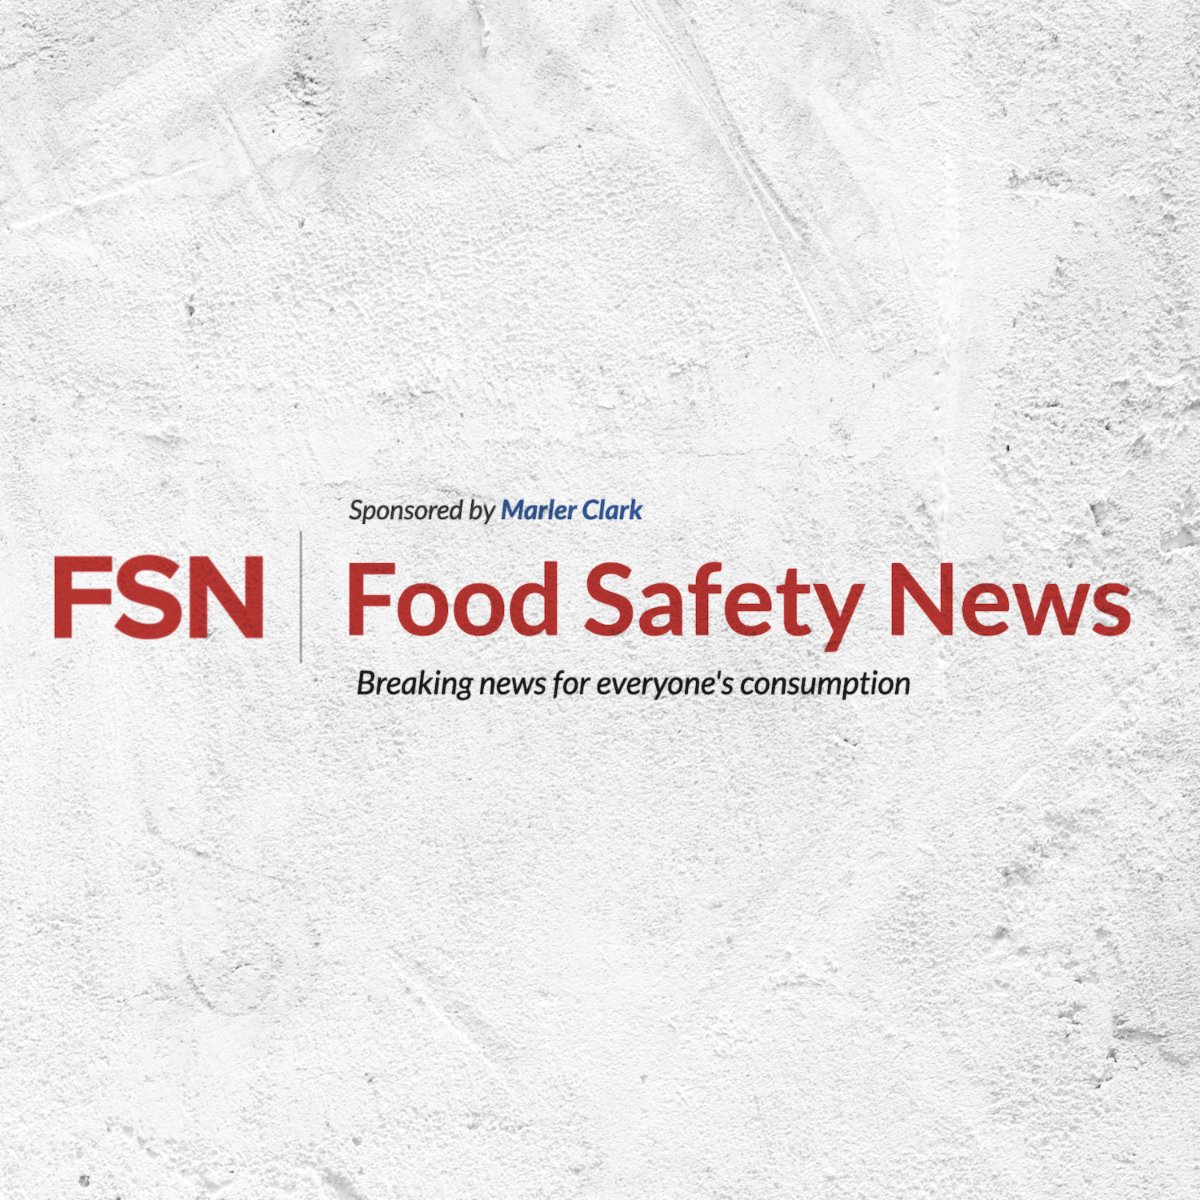 Food Safety News: Breaking news for everyone's consumption; A daily online newspaper dedicated to all things food safety.
For today’s headlines click here:
foodsafetynews.com

@foodsafetynews #foodsafetycourses #foodindustry #foodandbeverageprocessors #foodprocessing